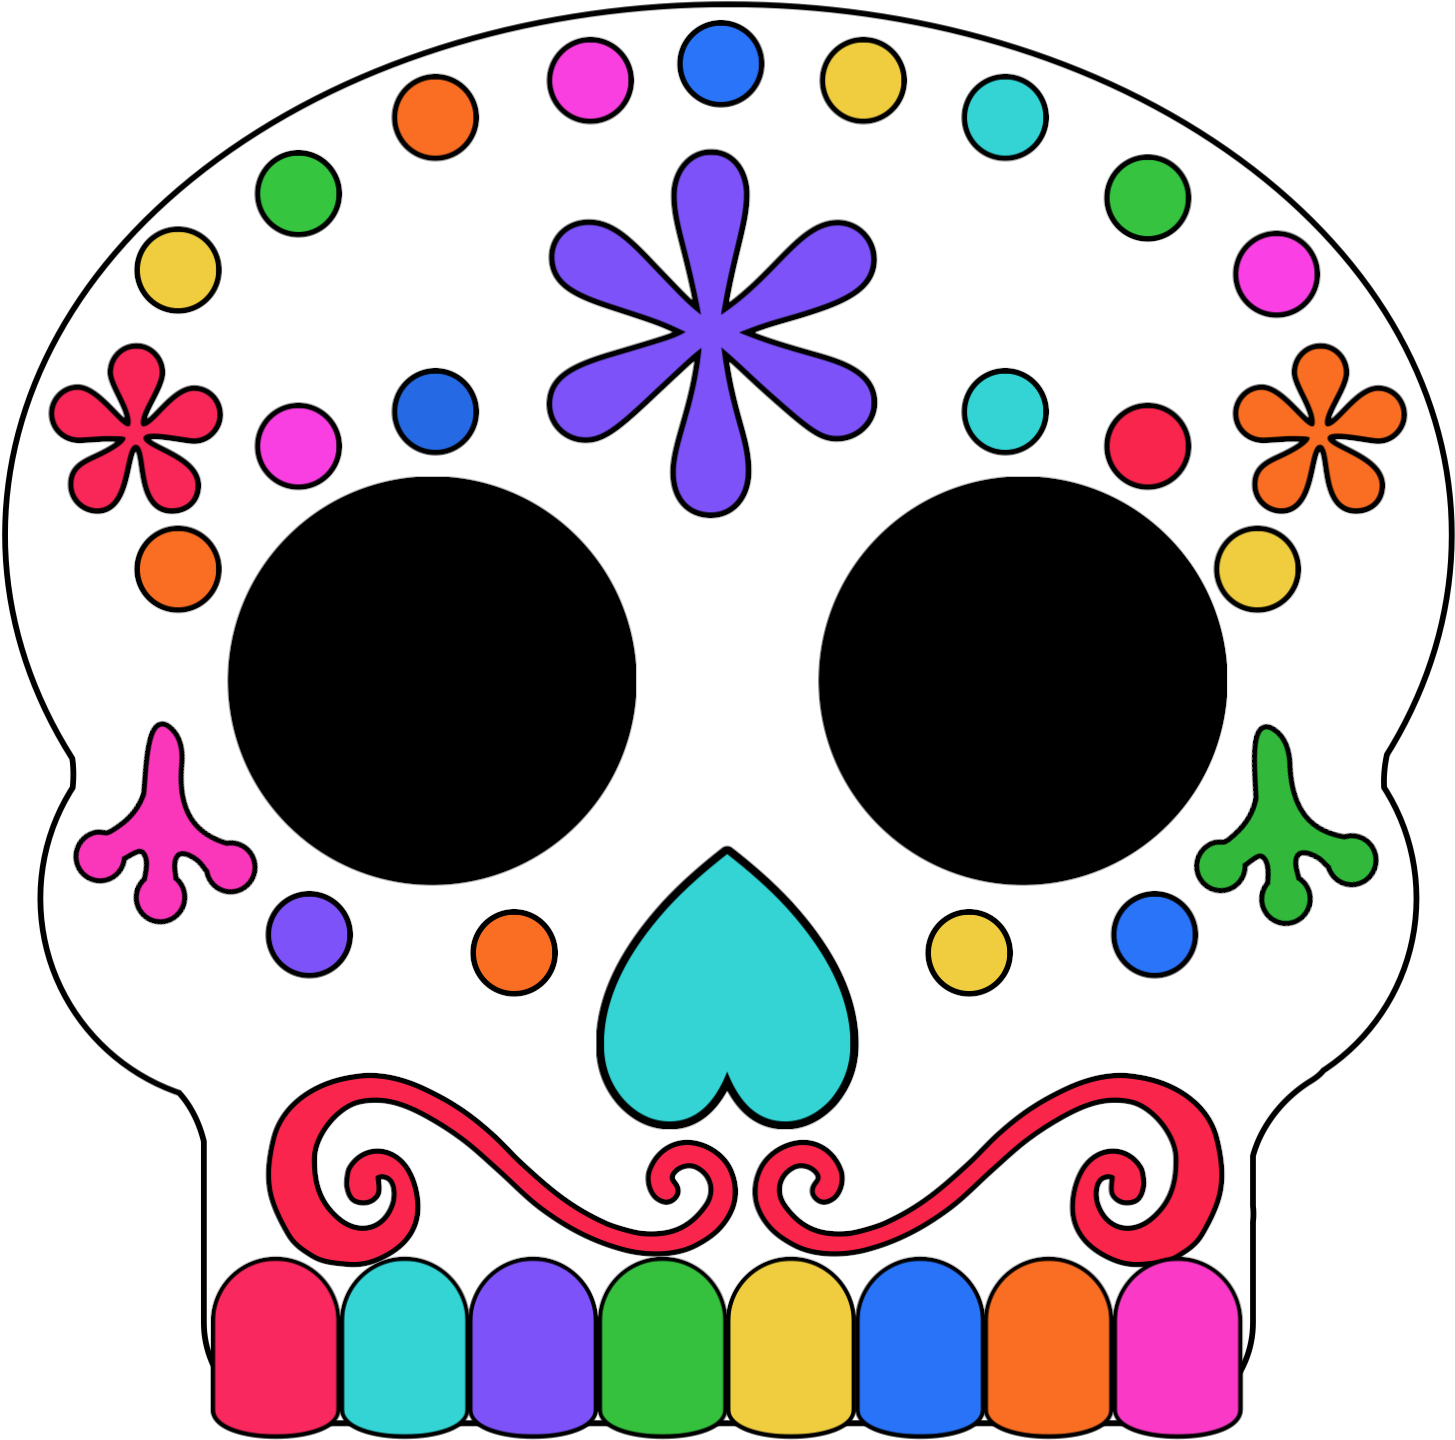 Colored In Day Of The Dead Sugar Skull Masks - Colored In Day Of The Dead Sugar Skull Masks (1563x1563)